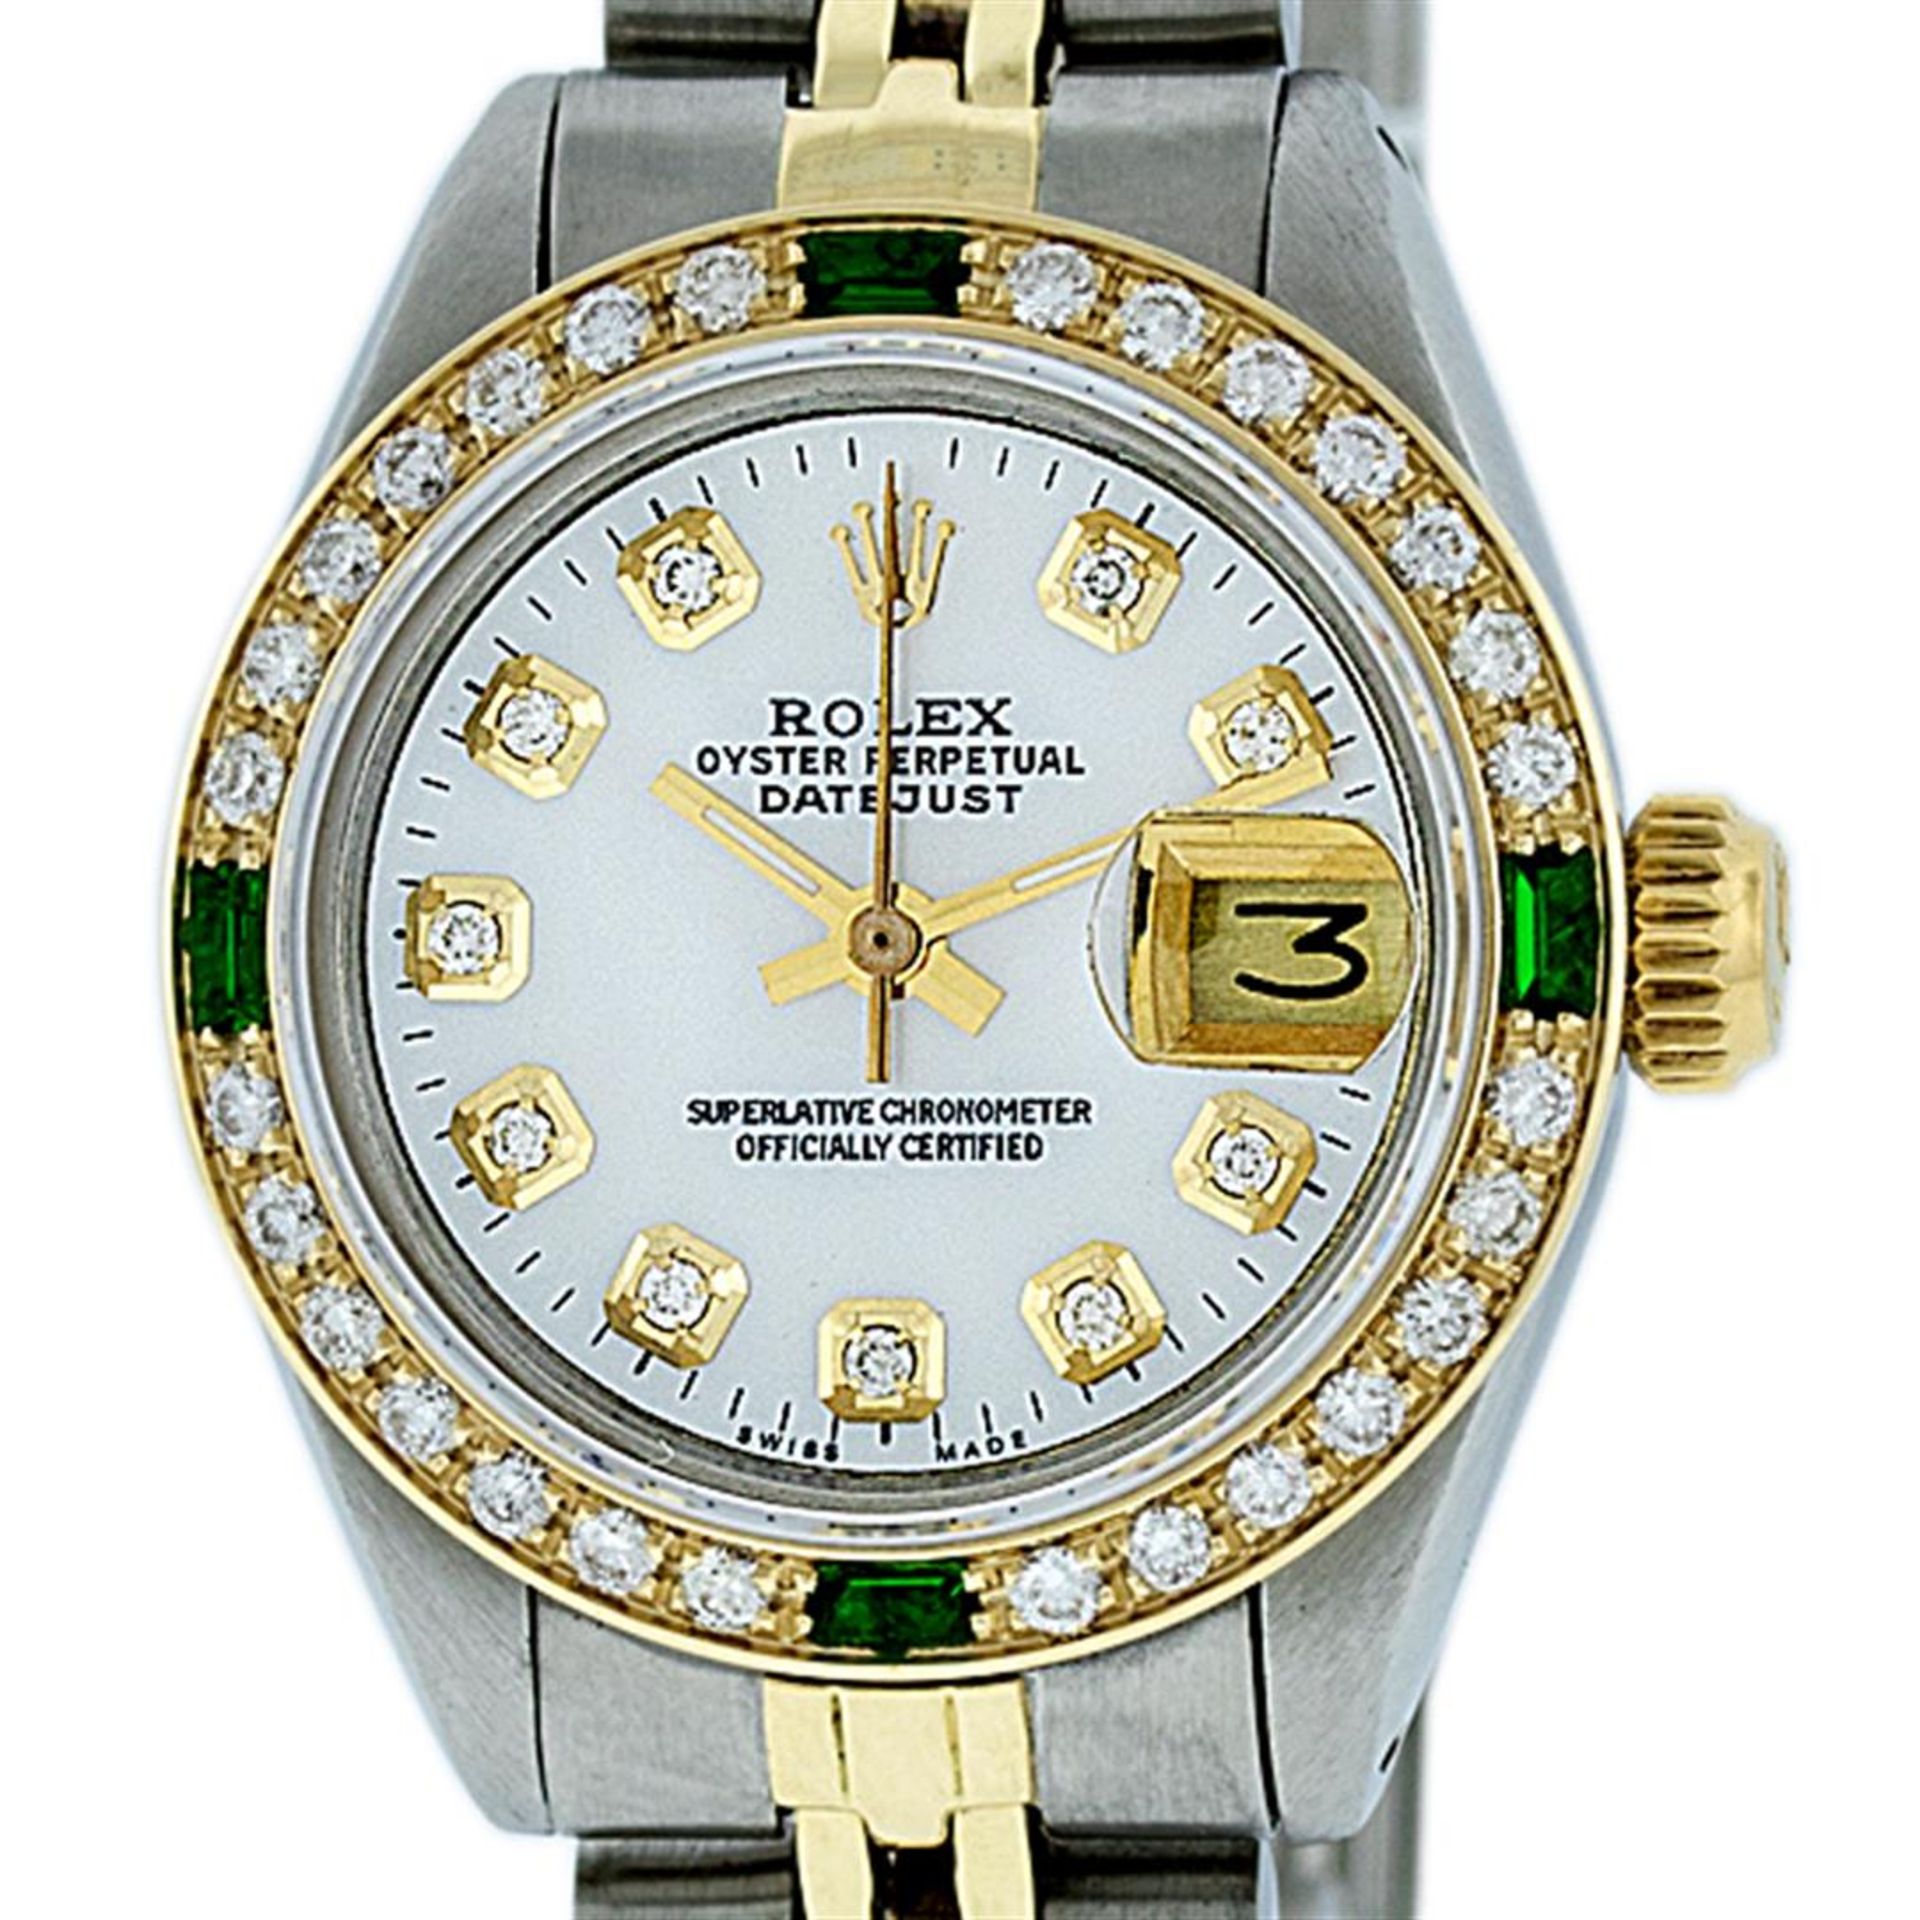 Rolex Ladies 2T White Diamond & Emerald Oyster Perpetual Datejust Wristwatch - Image 2 of 9